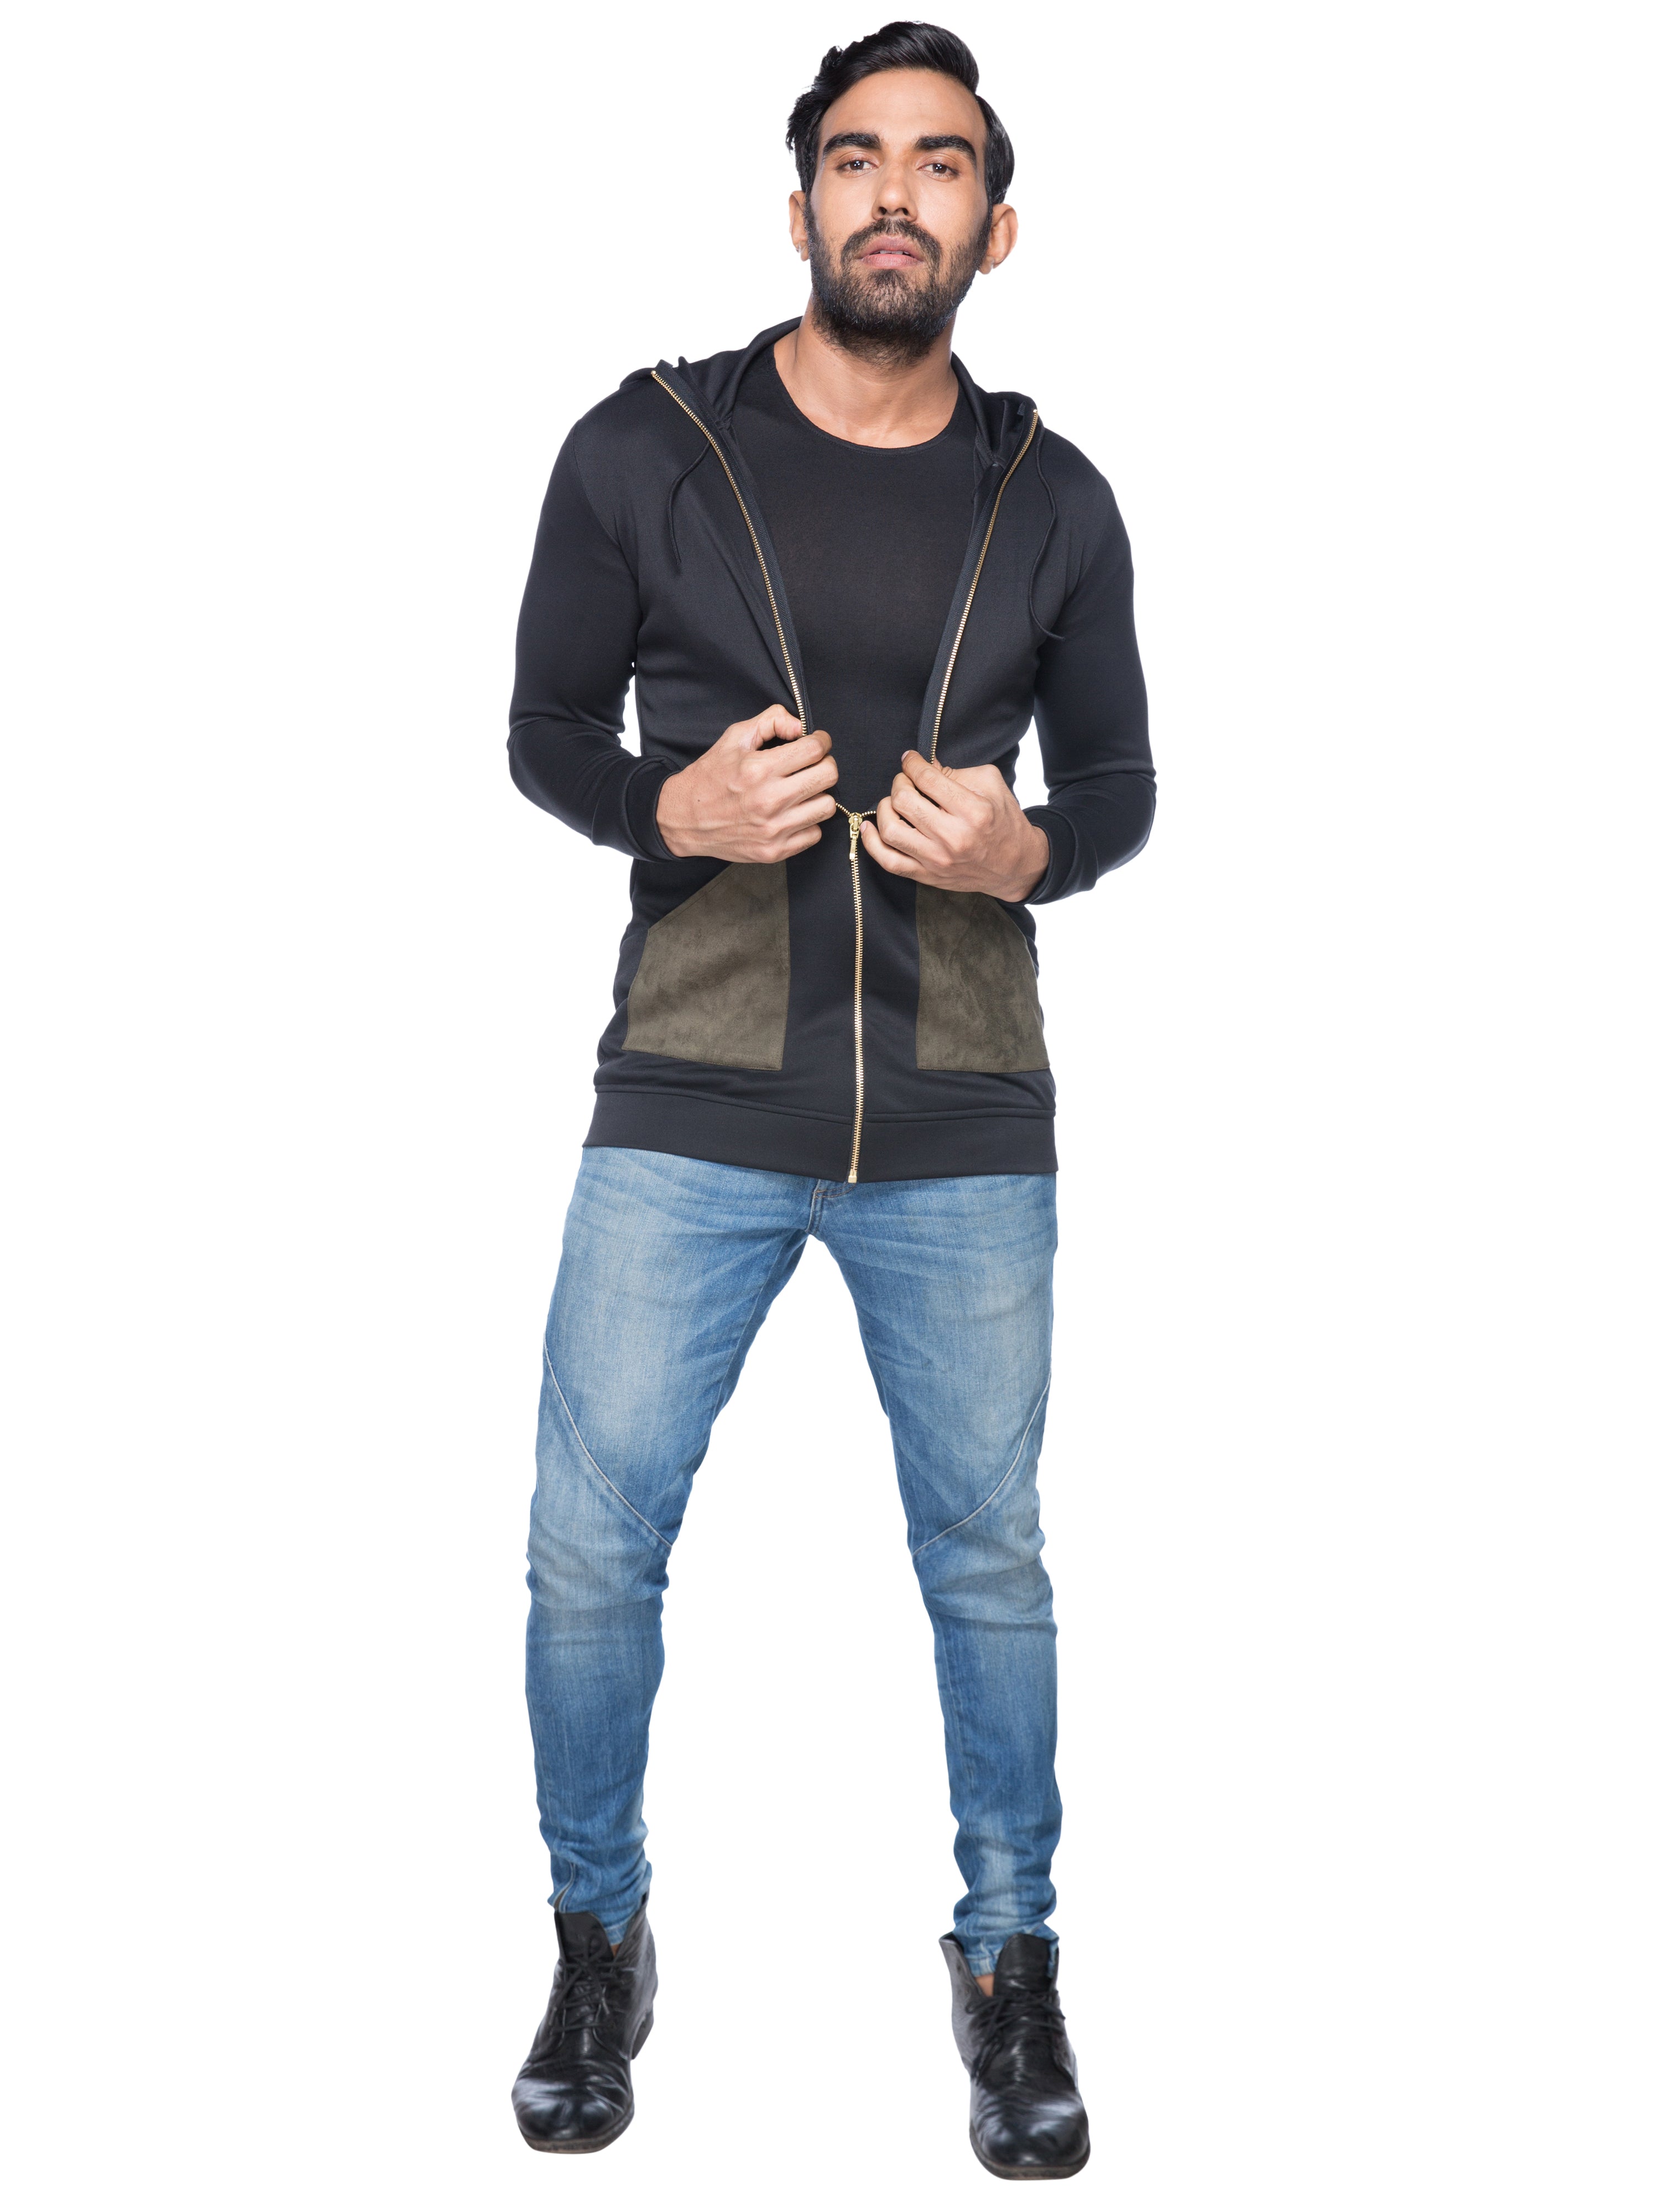 BLACK HOODIE JACKET AND T-SHIRT WITH CONTRAST POCKET